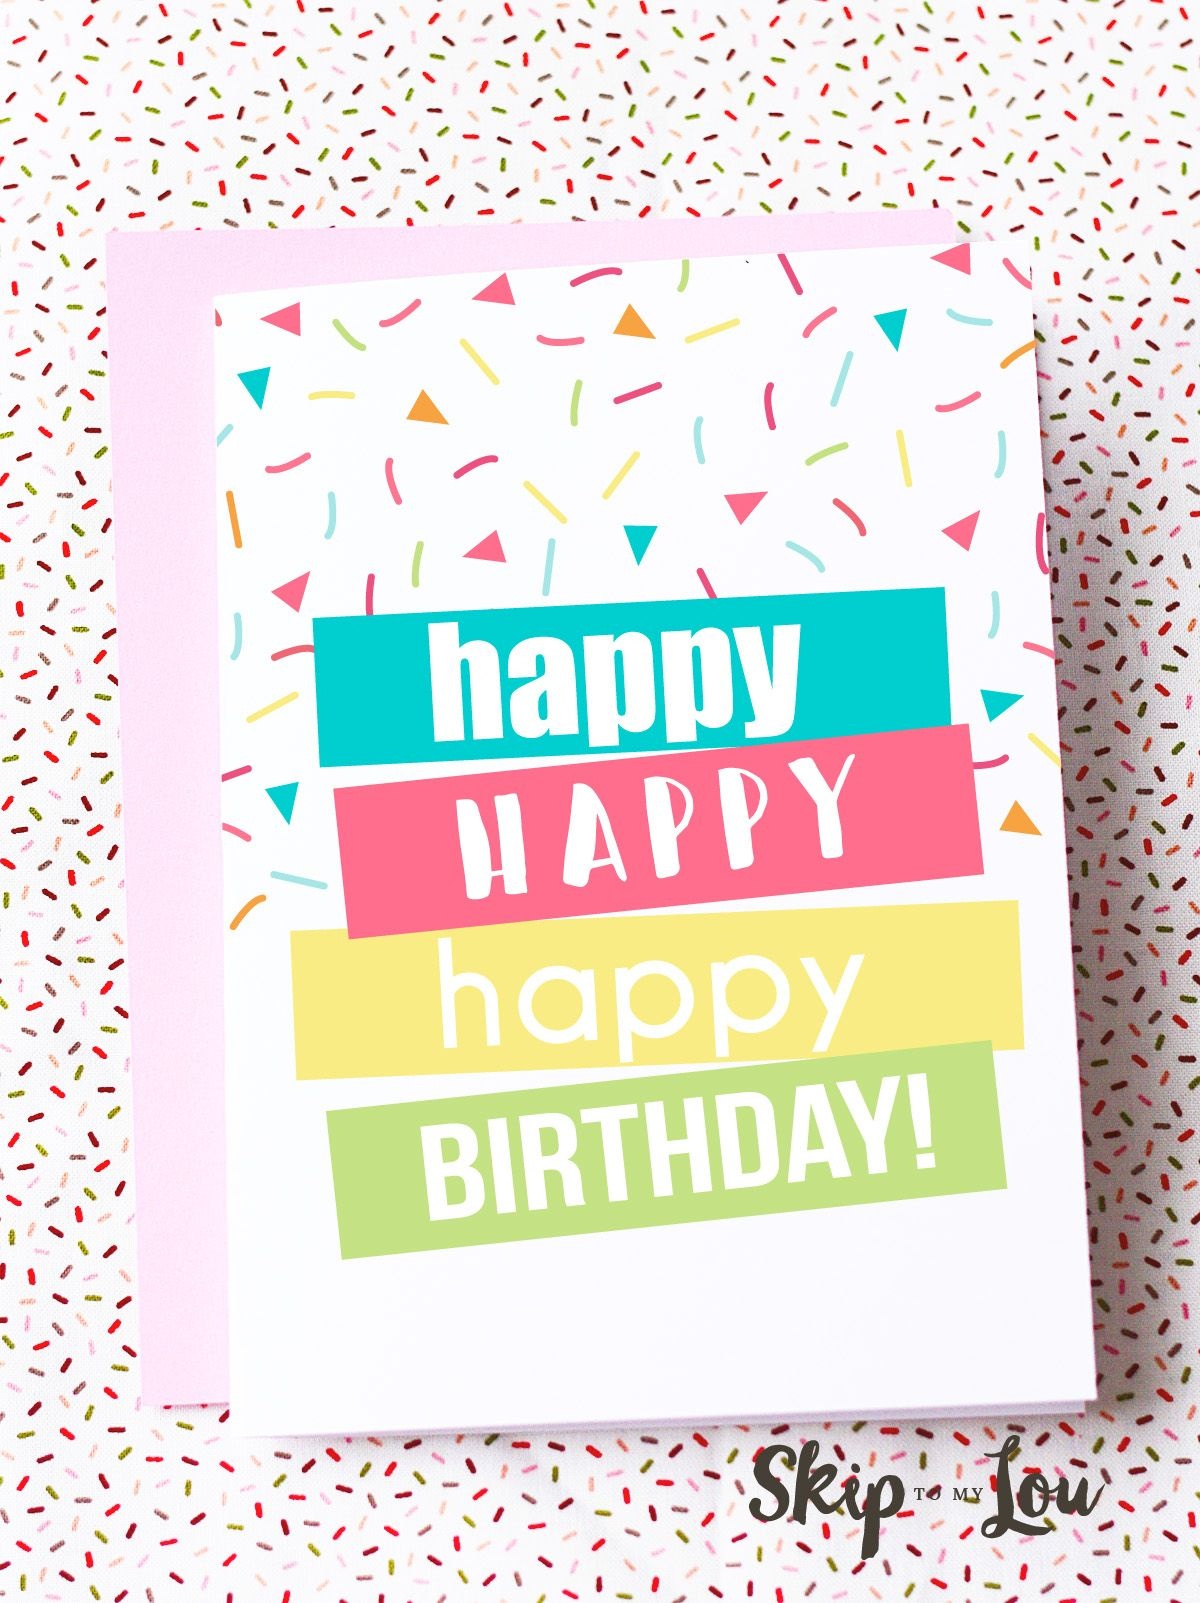 Free Printable Birthday Cards | Best Of Pinterest | Free Printable - Free Printable Birthday Cards For Wife